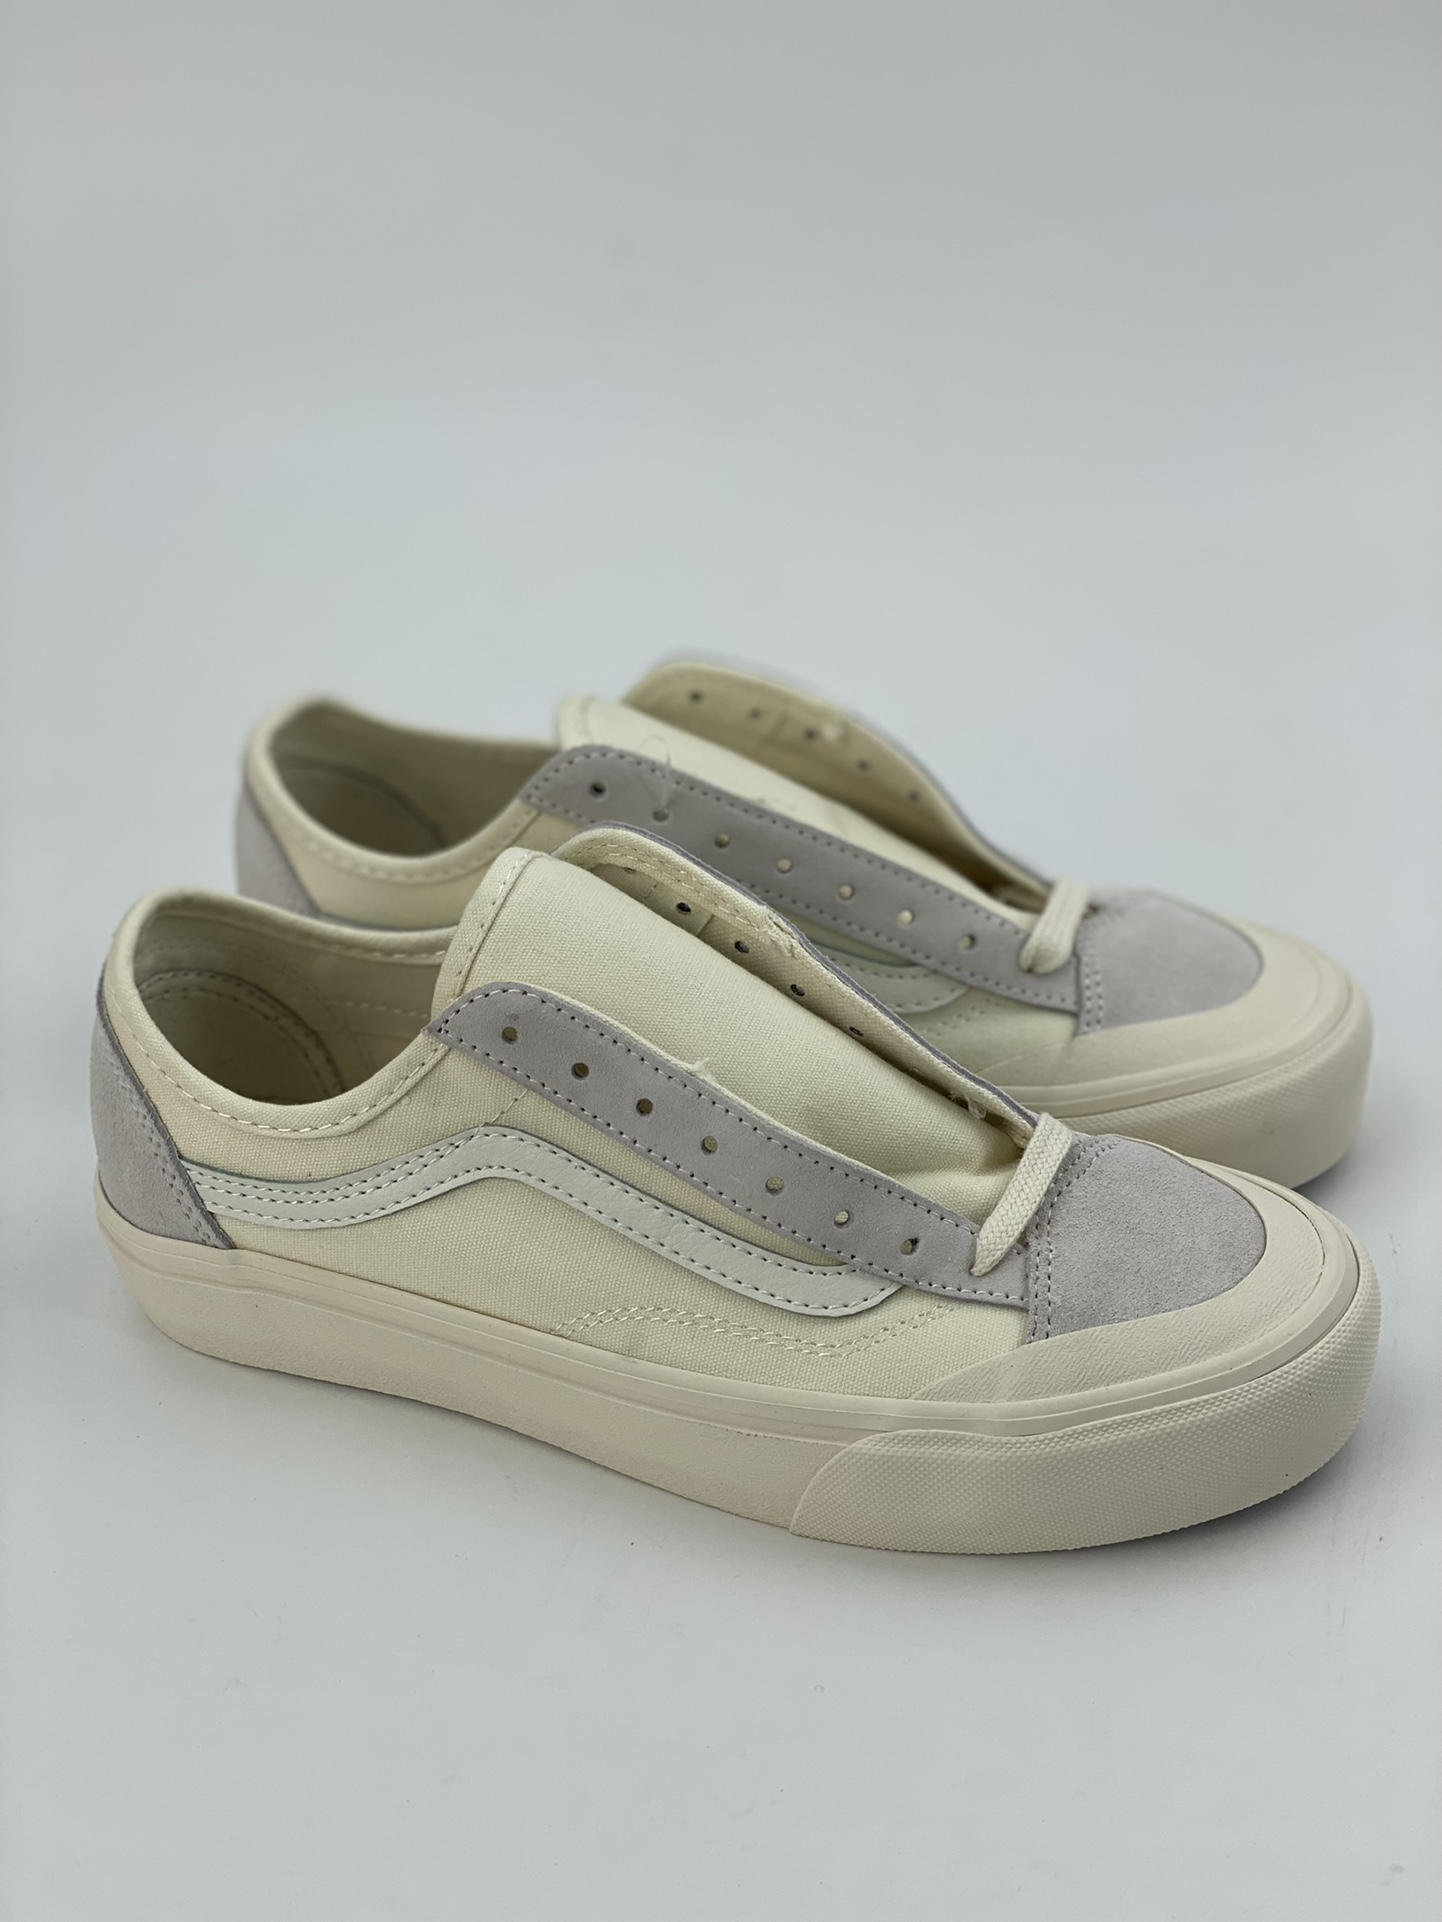 Vans official Style 136 Decon VR3 white simple retro sneakers